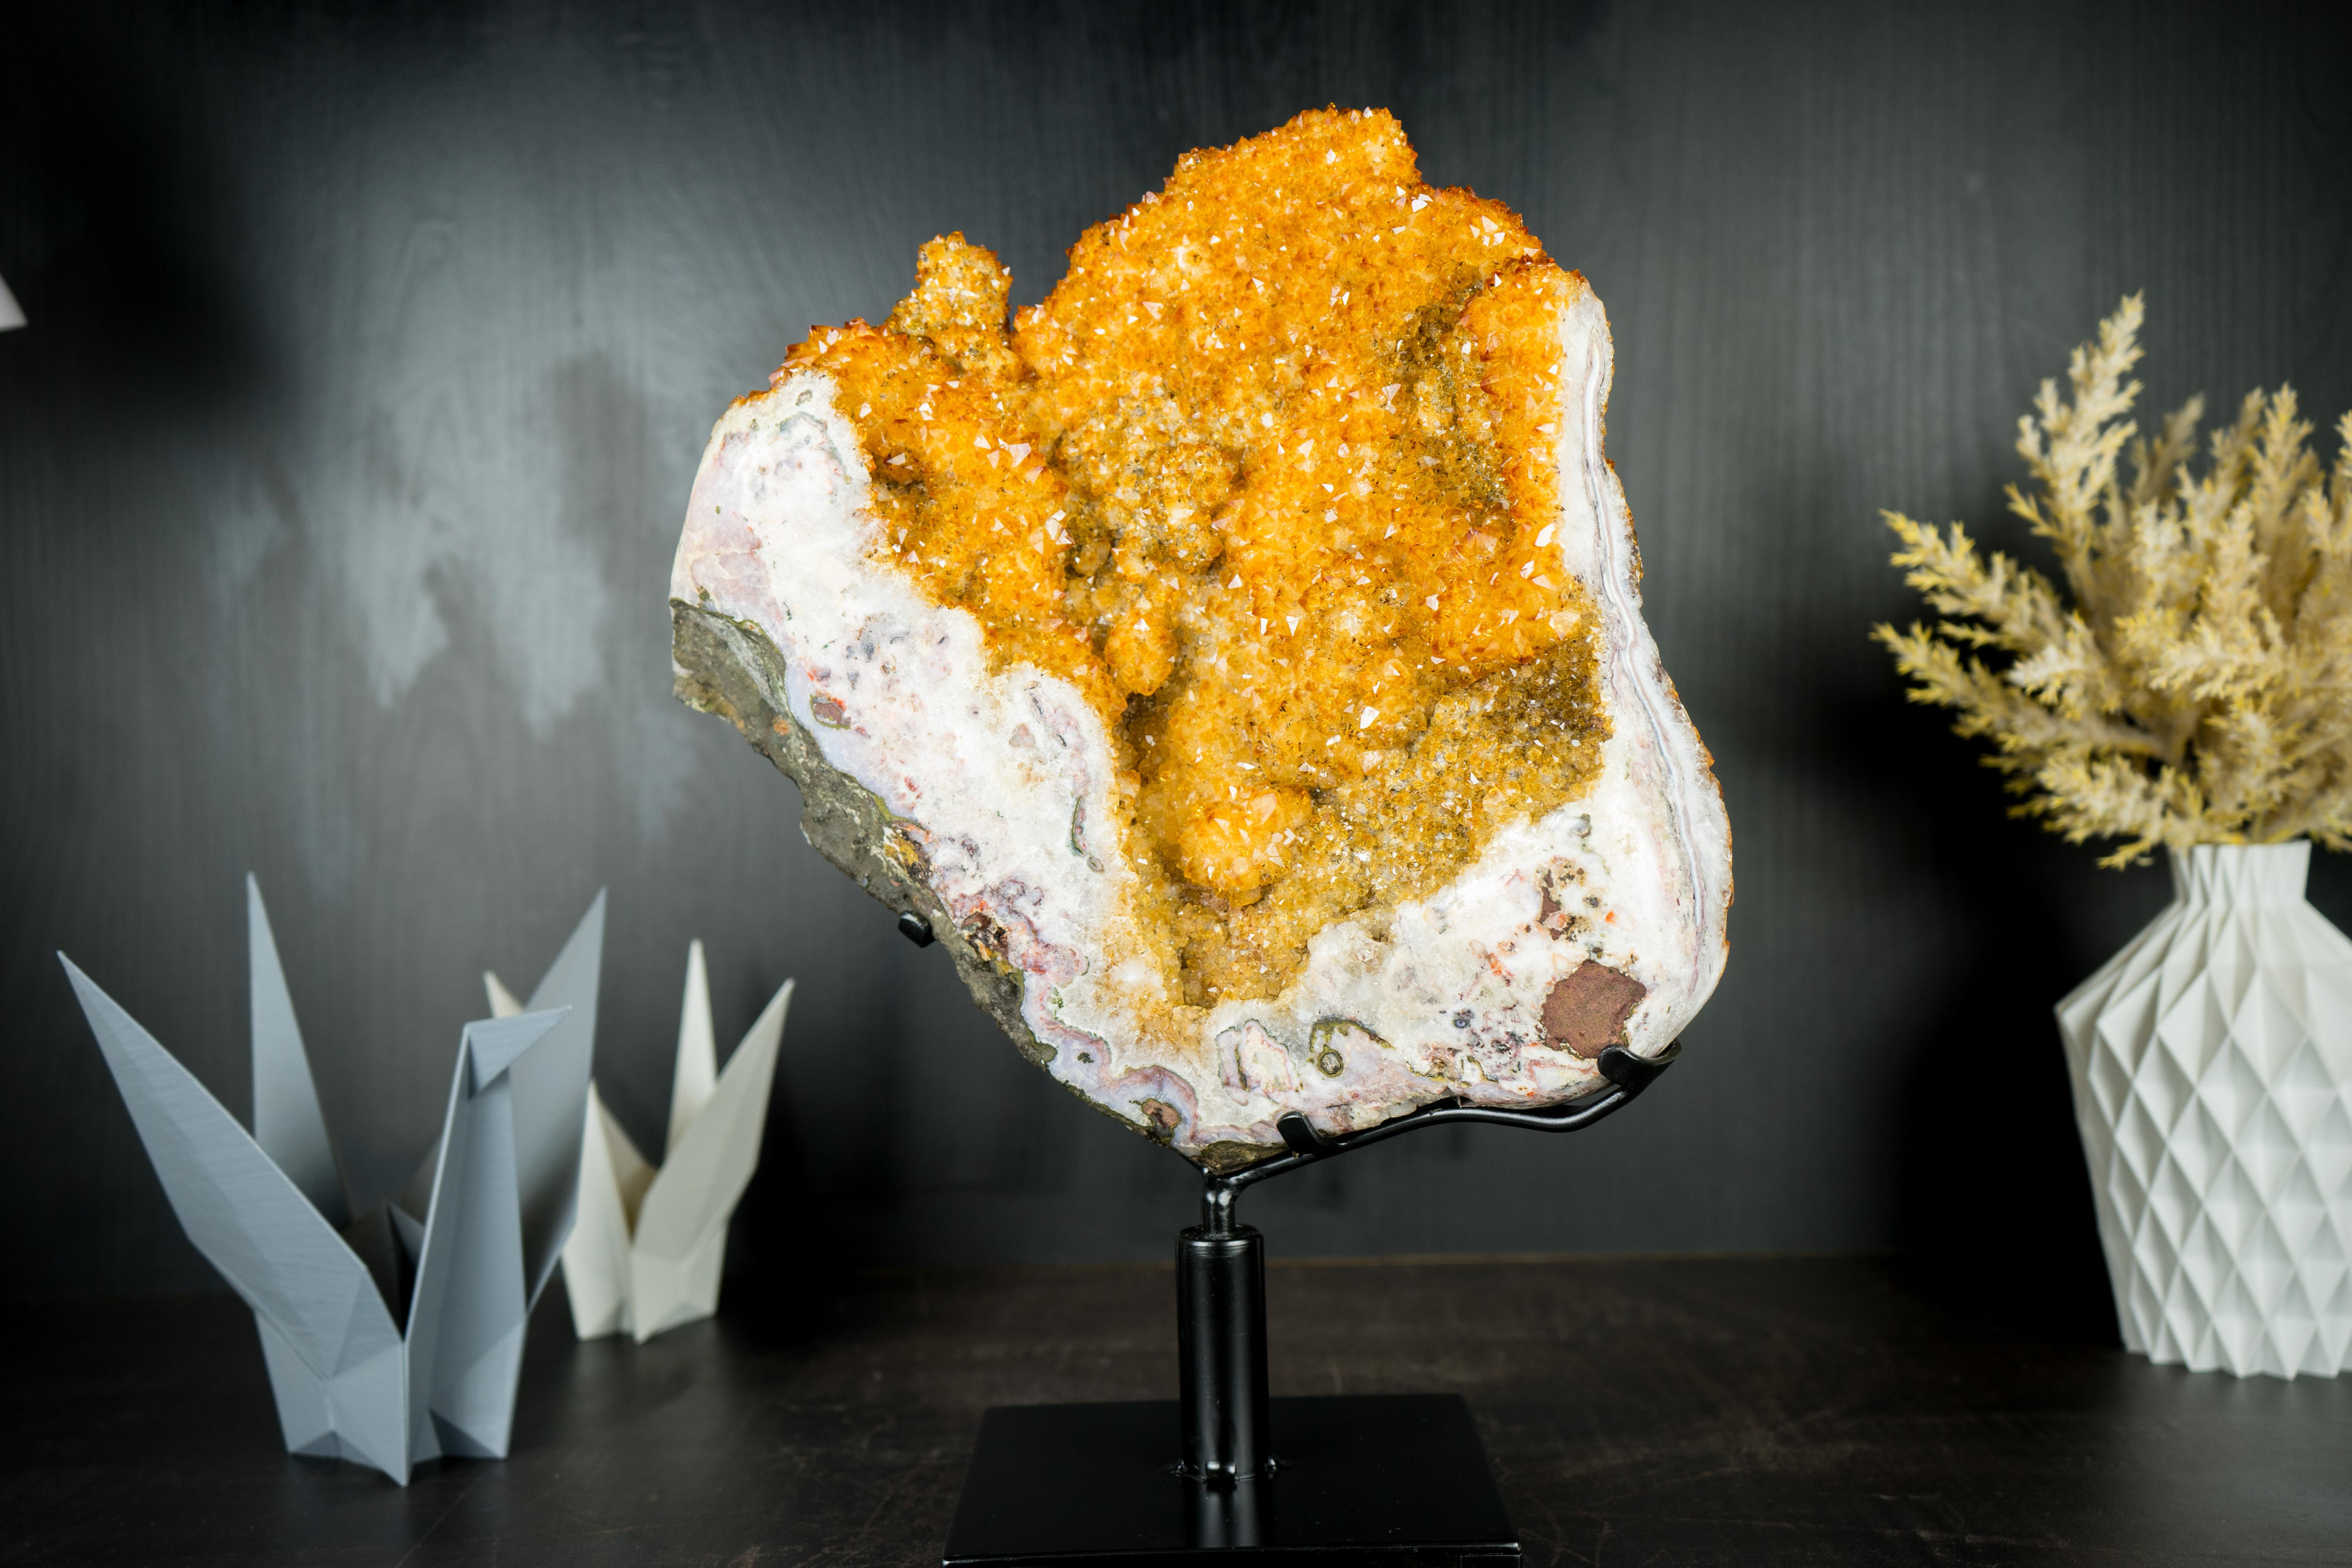 AAA Citrine Cluster with Madeira Citrine Druzy and Geometrical Calcite, Self-Standing

▫️ Description

With colors resembling a Marigold or a Sunflower in full bloom and a shape that evokes alpine mountains, this Citrine Flower Cluster boasts